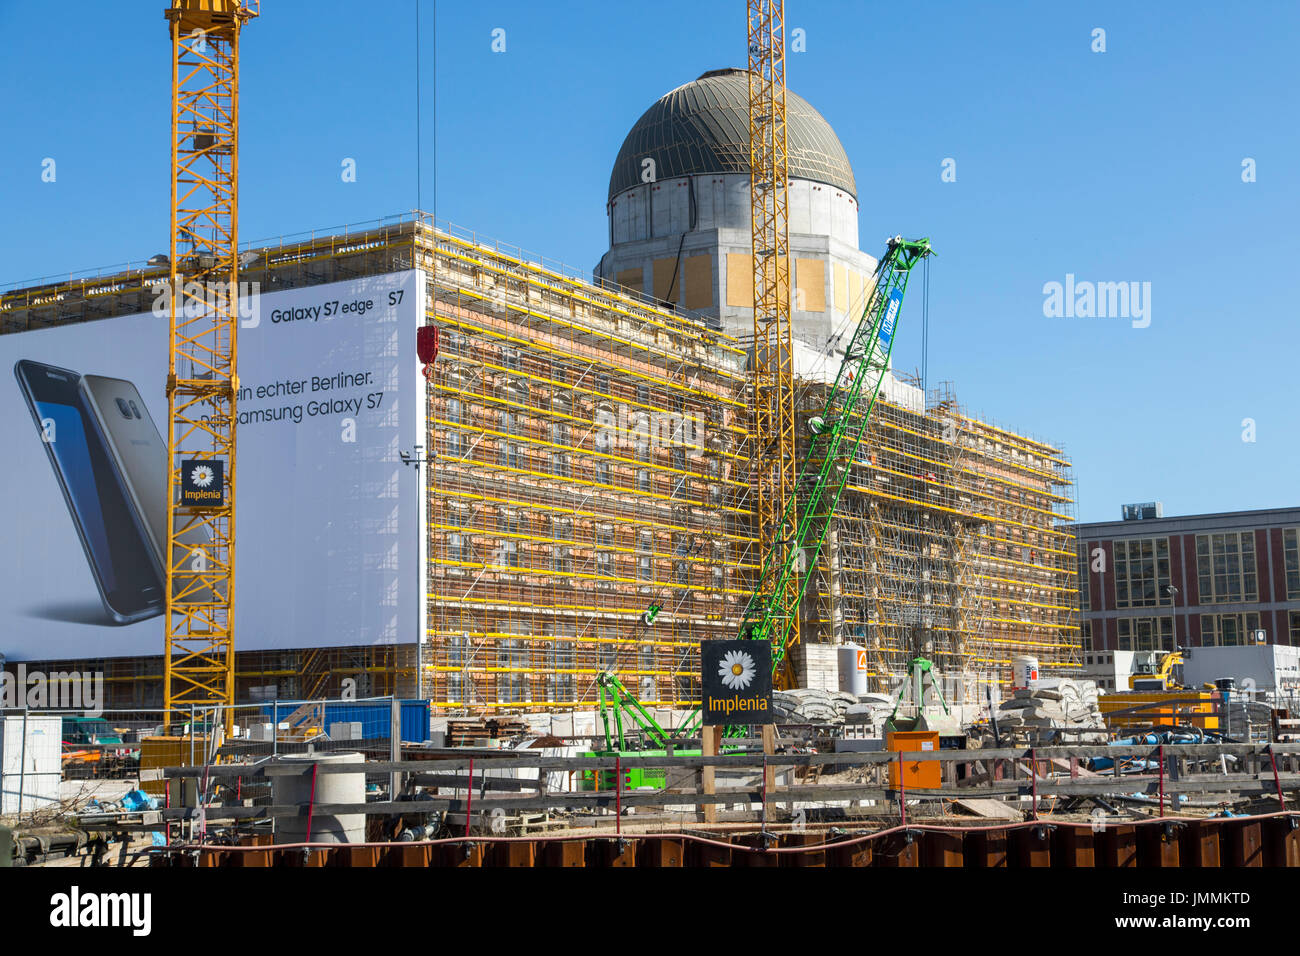 Berlin, Germany,  downtown, Mitte district, construction site of the Berliner Schlo§, rebuilding the old Berlin palace, Stock Photo